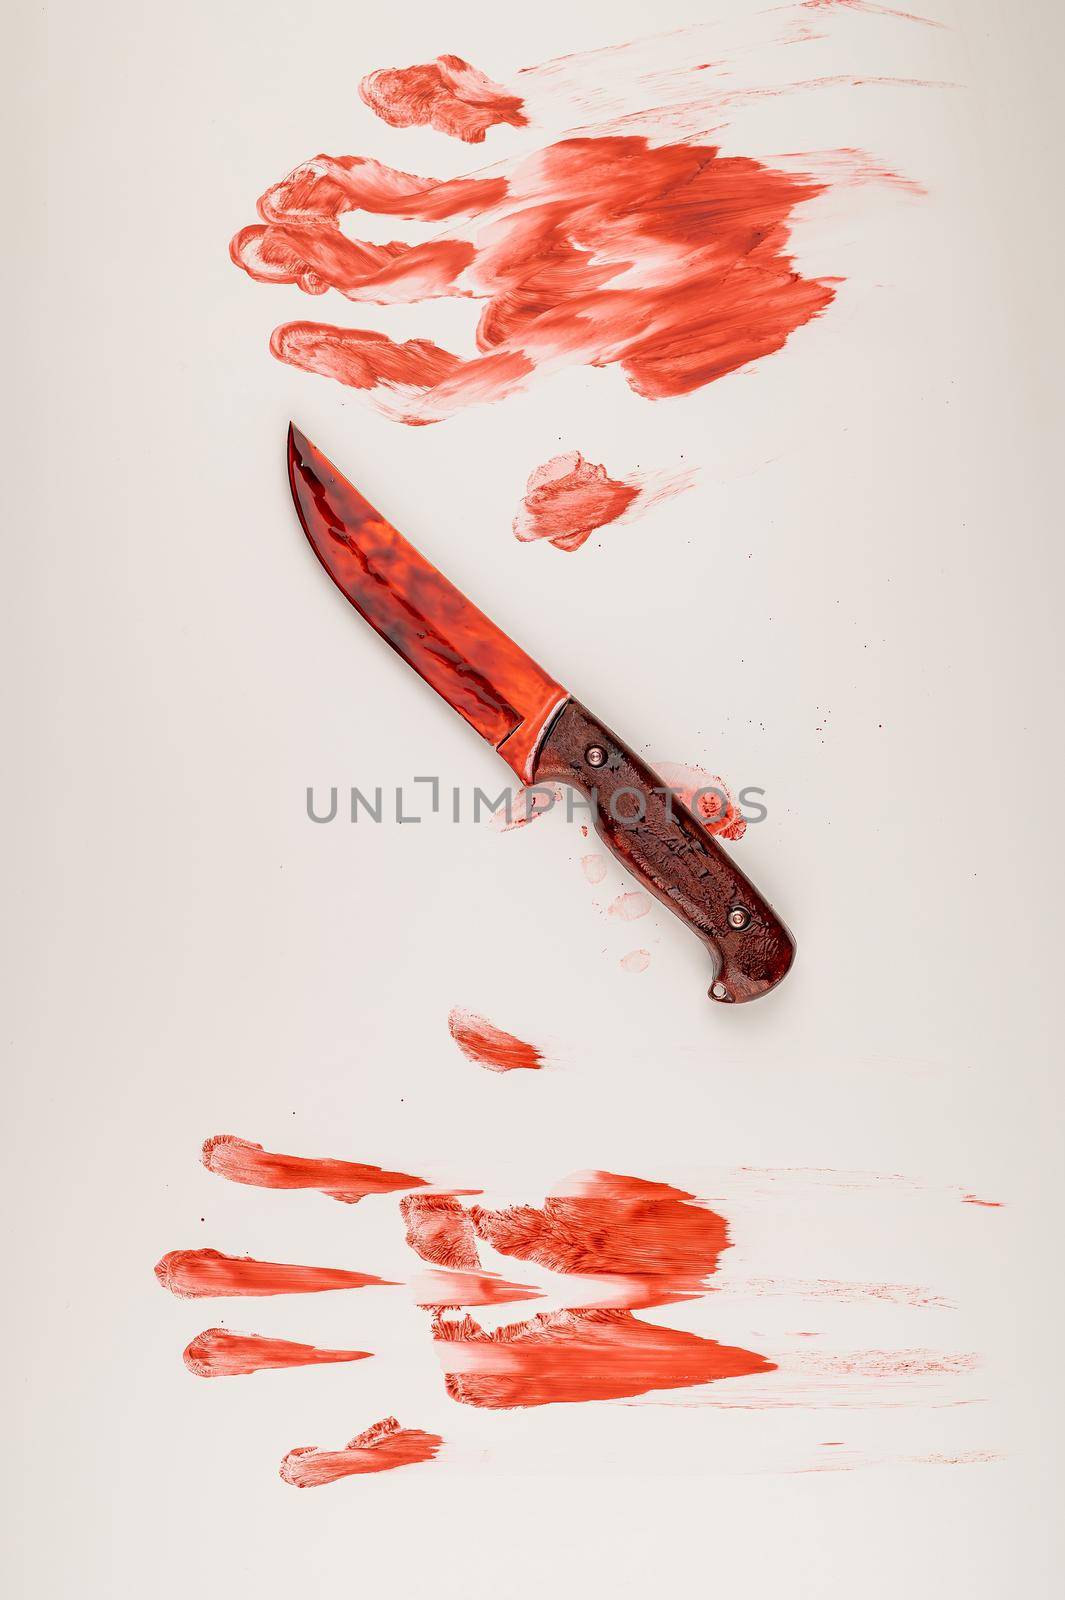 Bloody knife and hand prints in blood on a white table